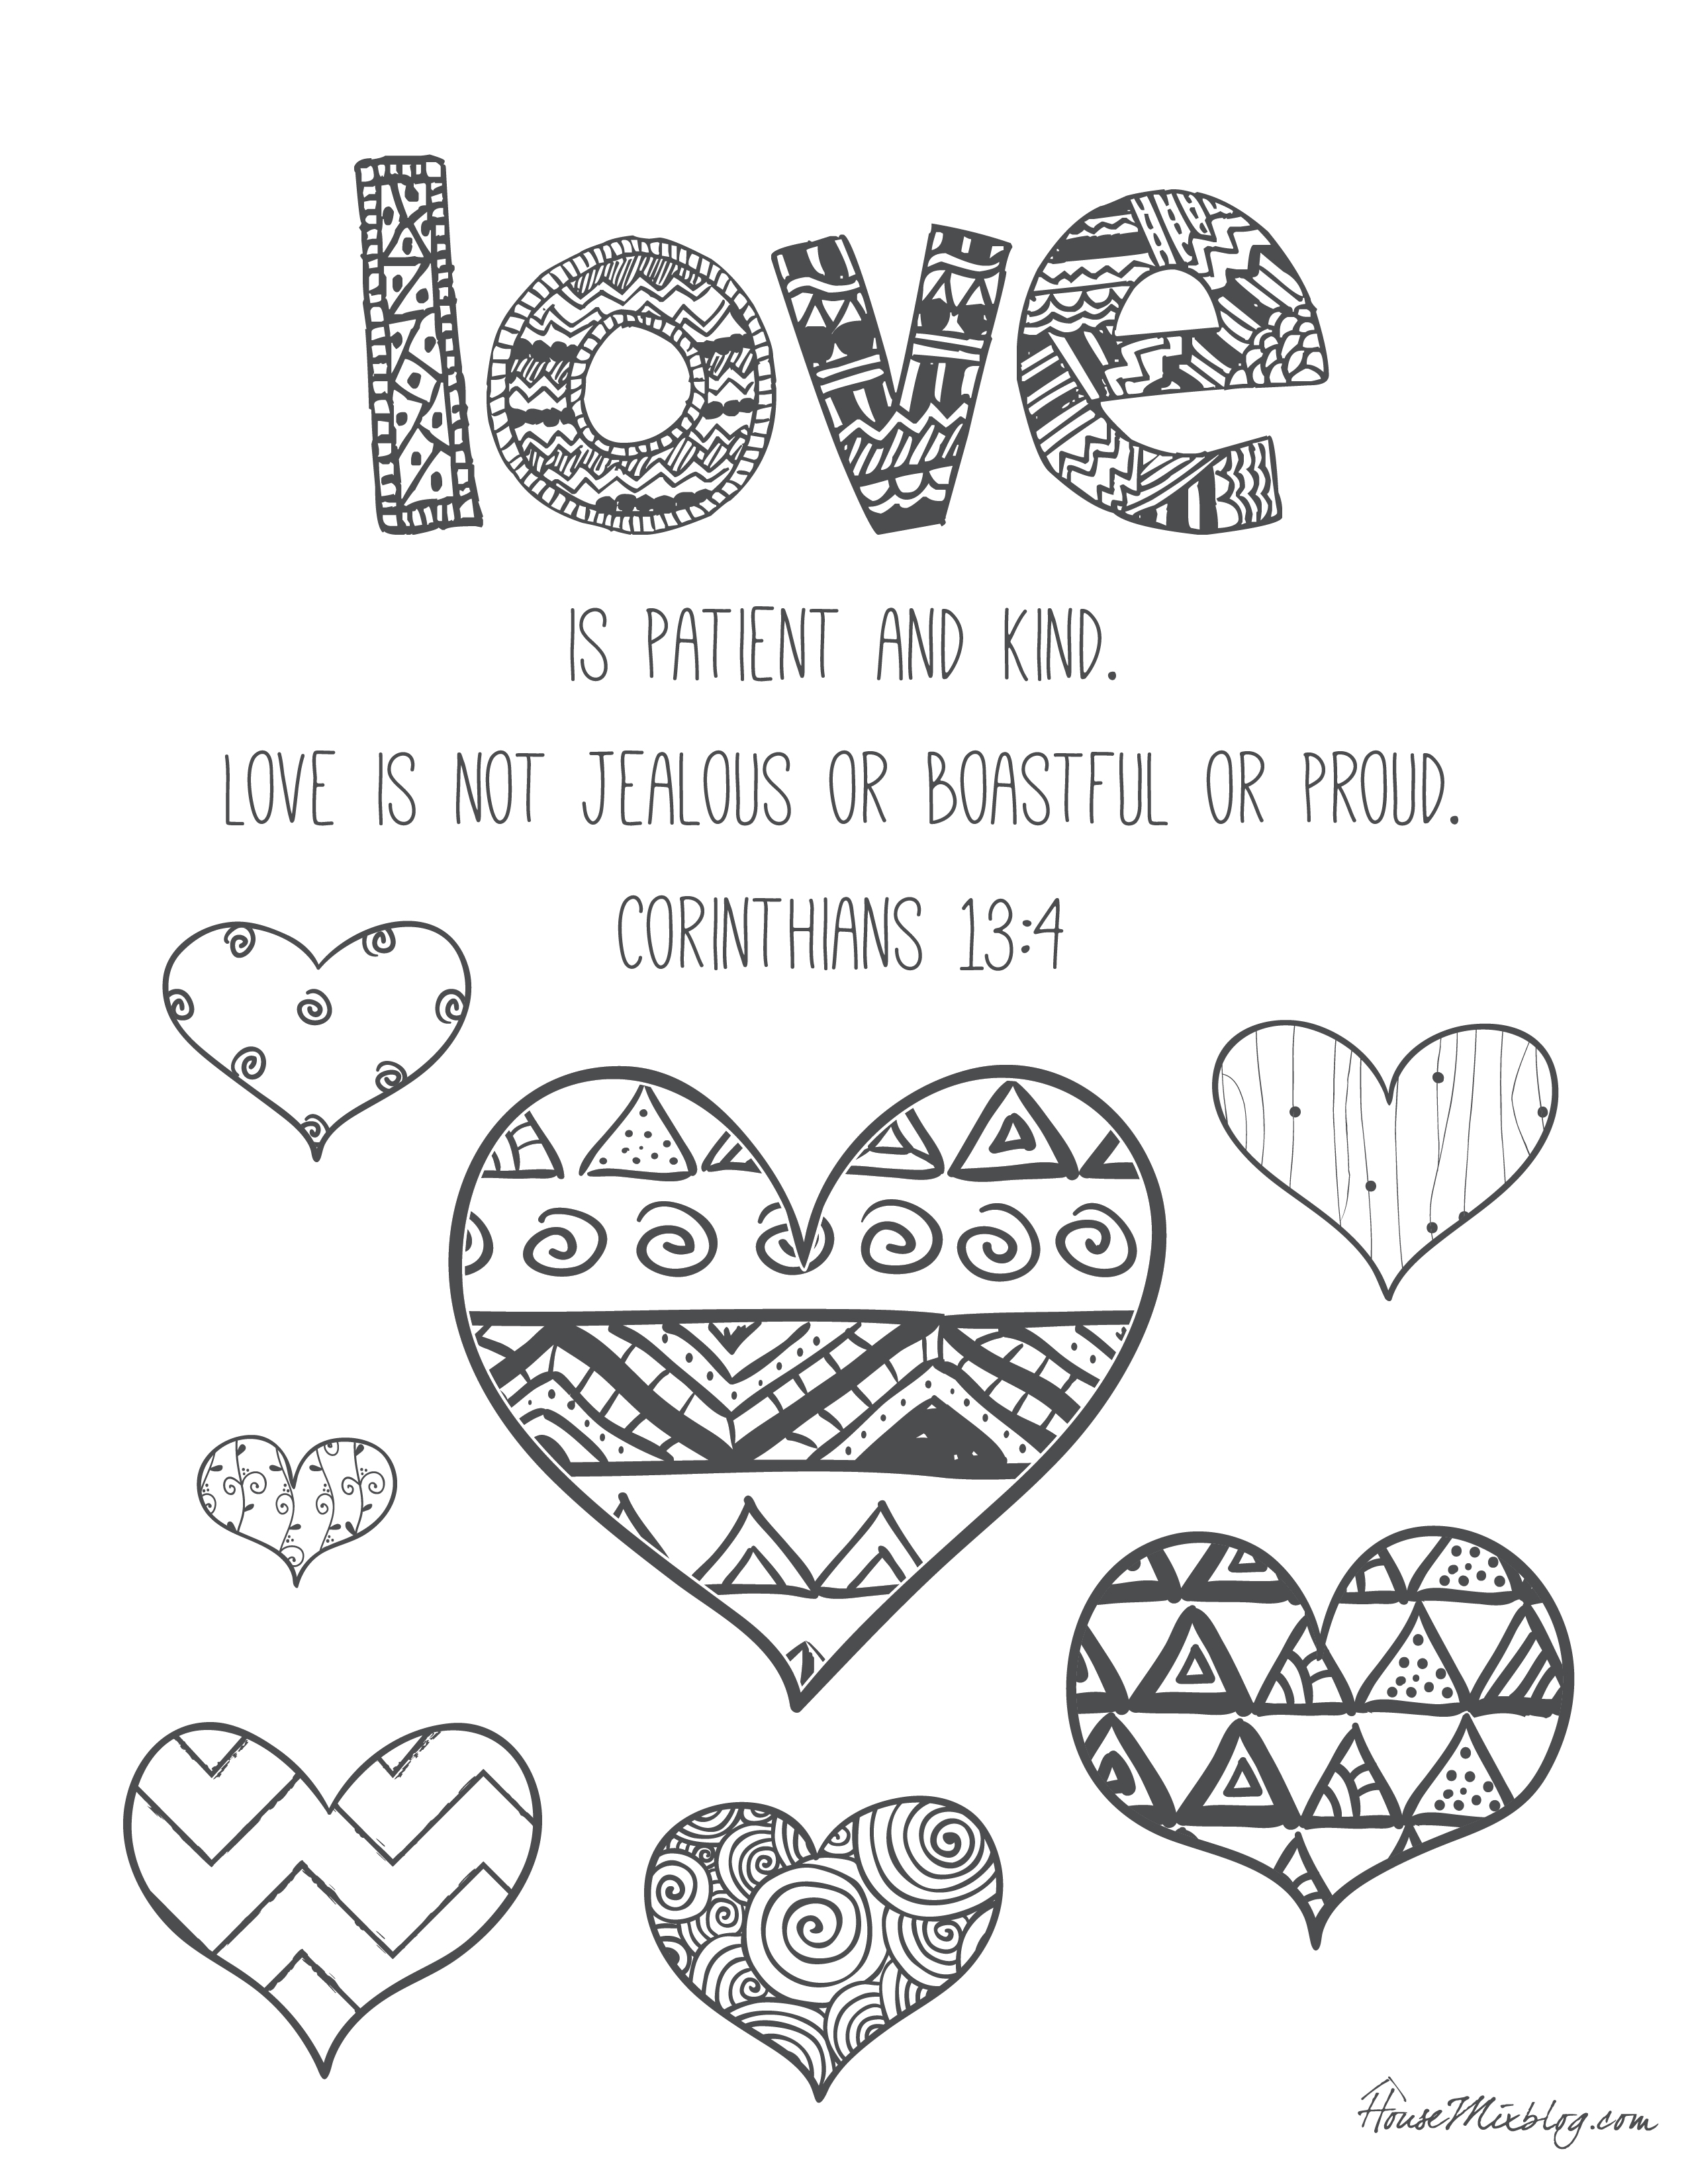 11 Bible verses to teach kids (with printables to color) | House Mix